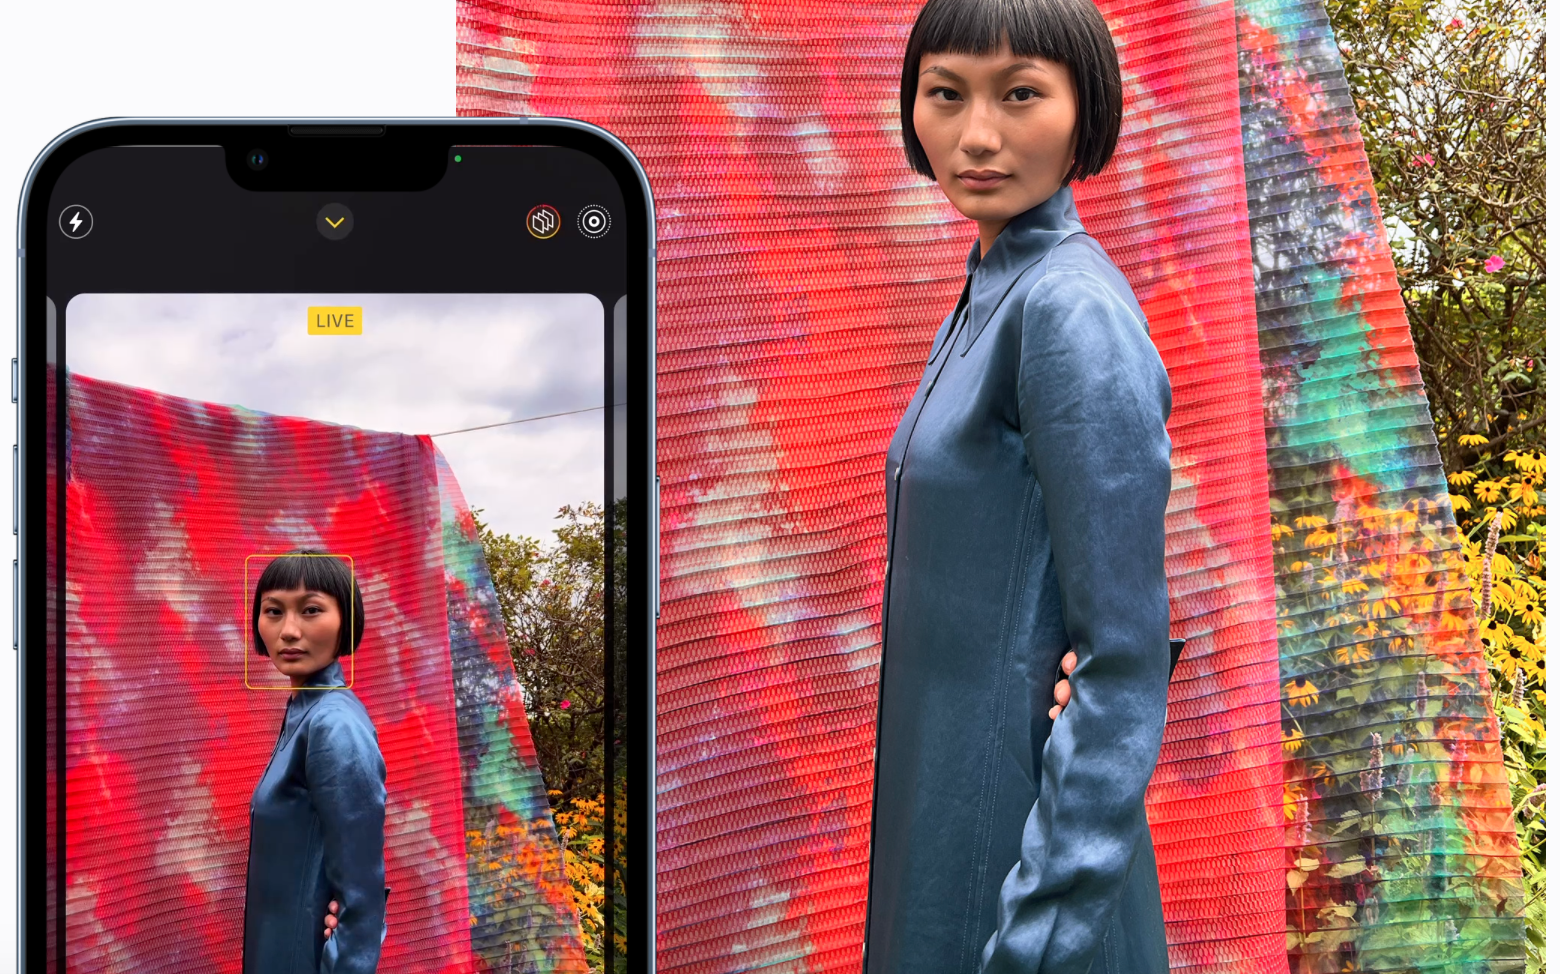 How to Take More Vibrant Photos on Your iPhone